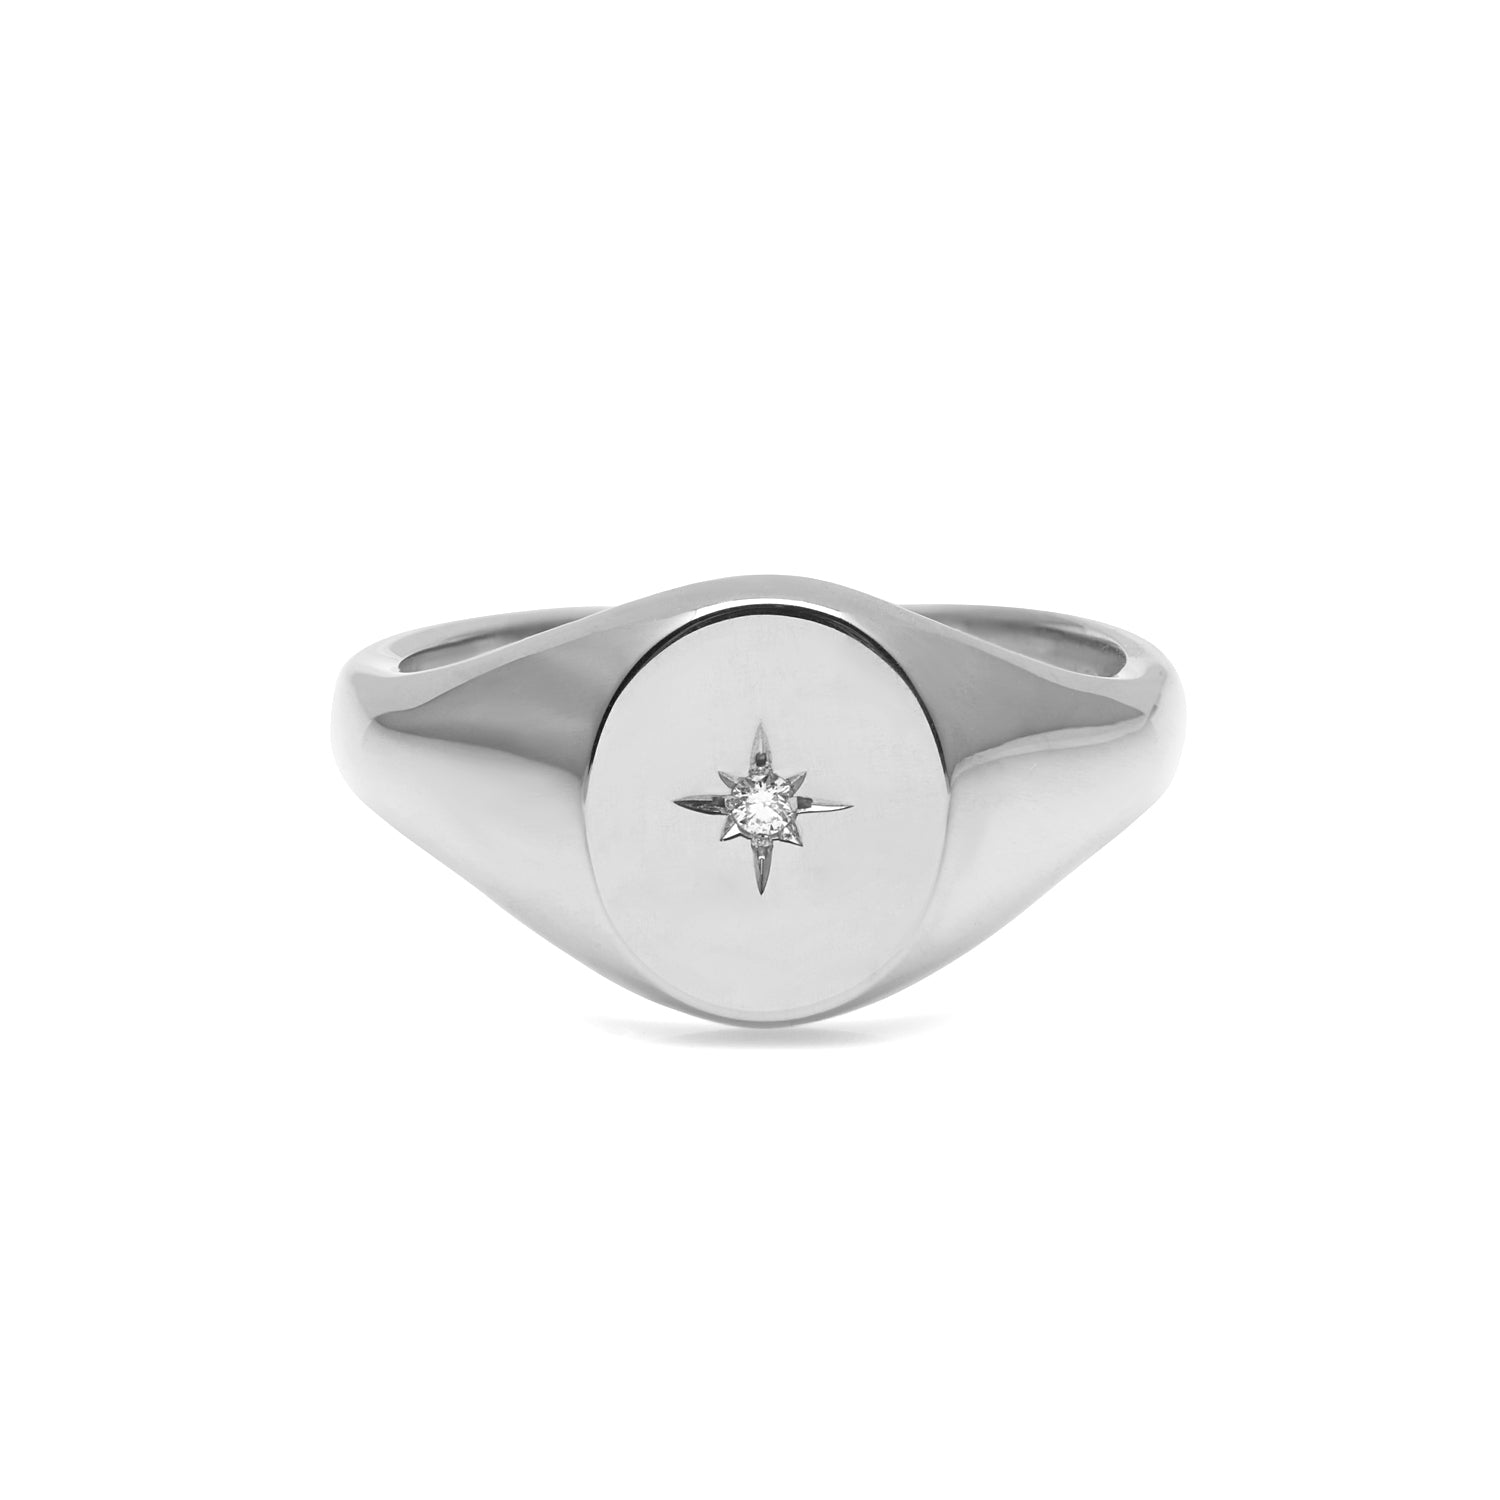 Oval Signet Ring with Star Set Diamond 11x9 - Silver